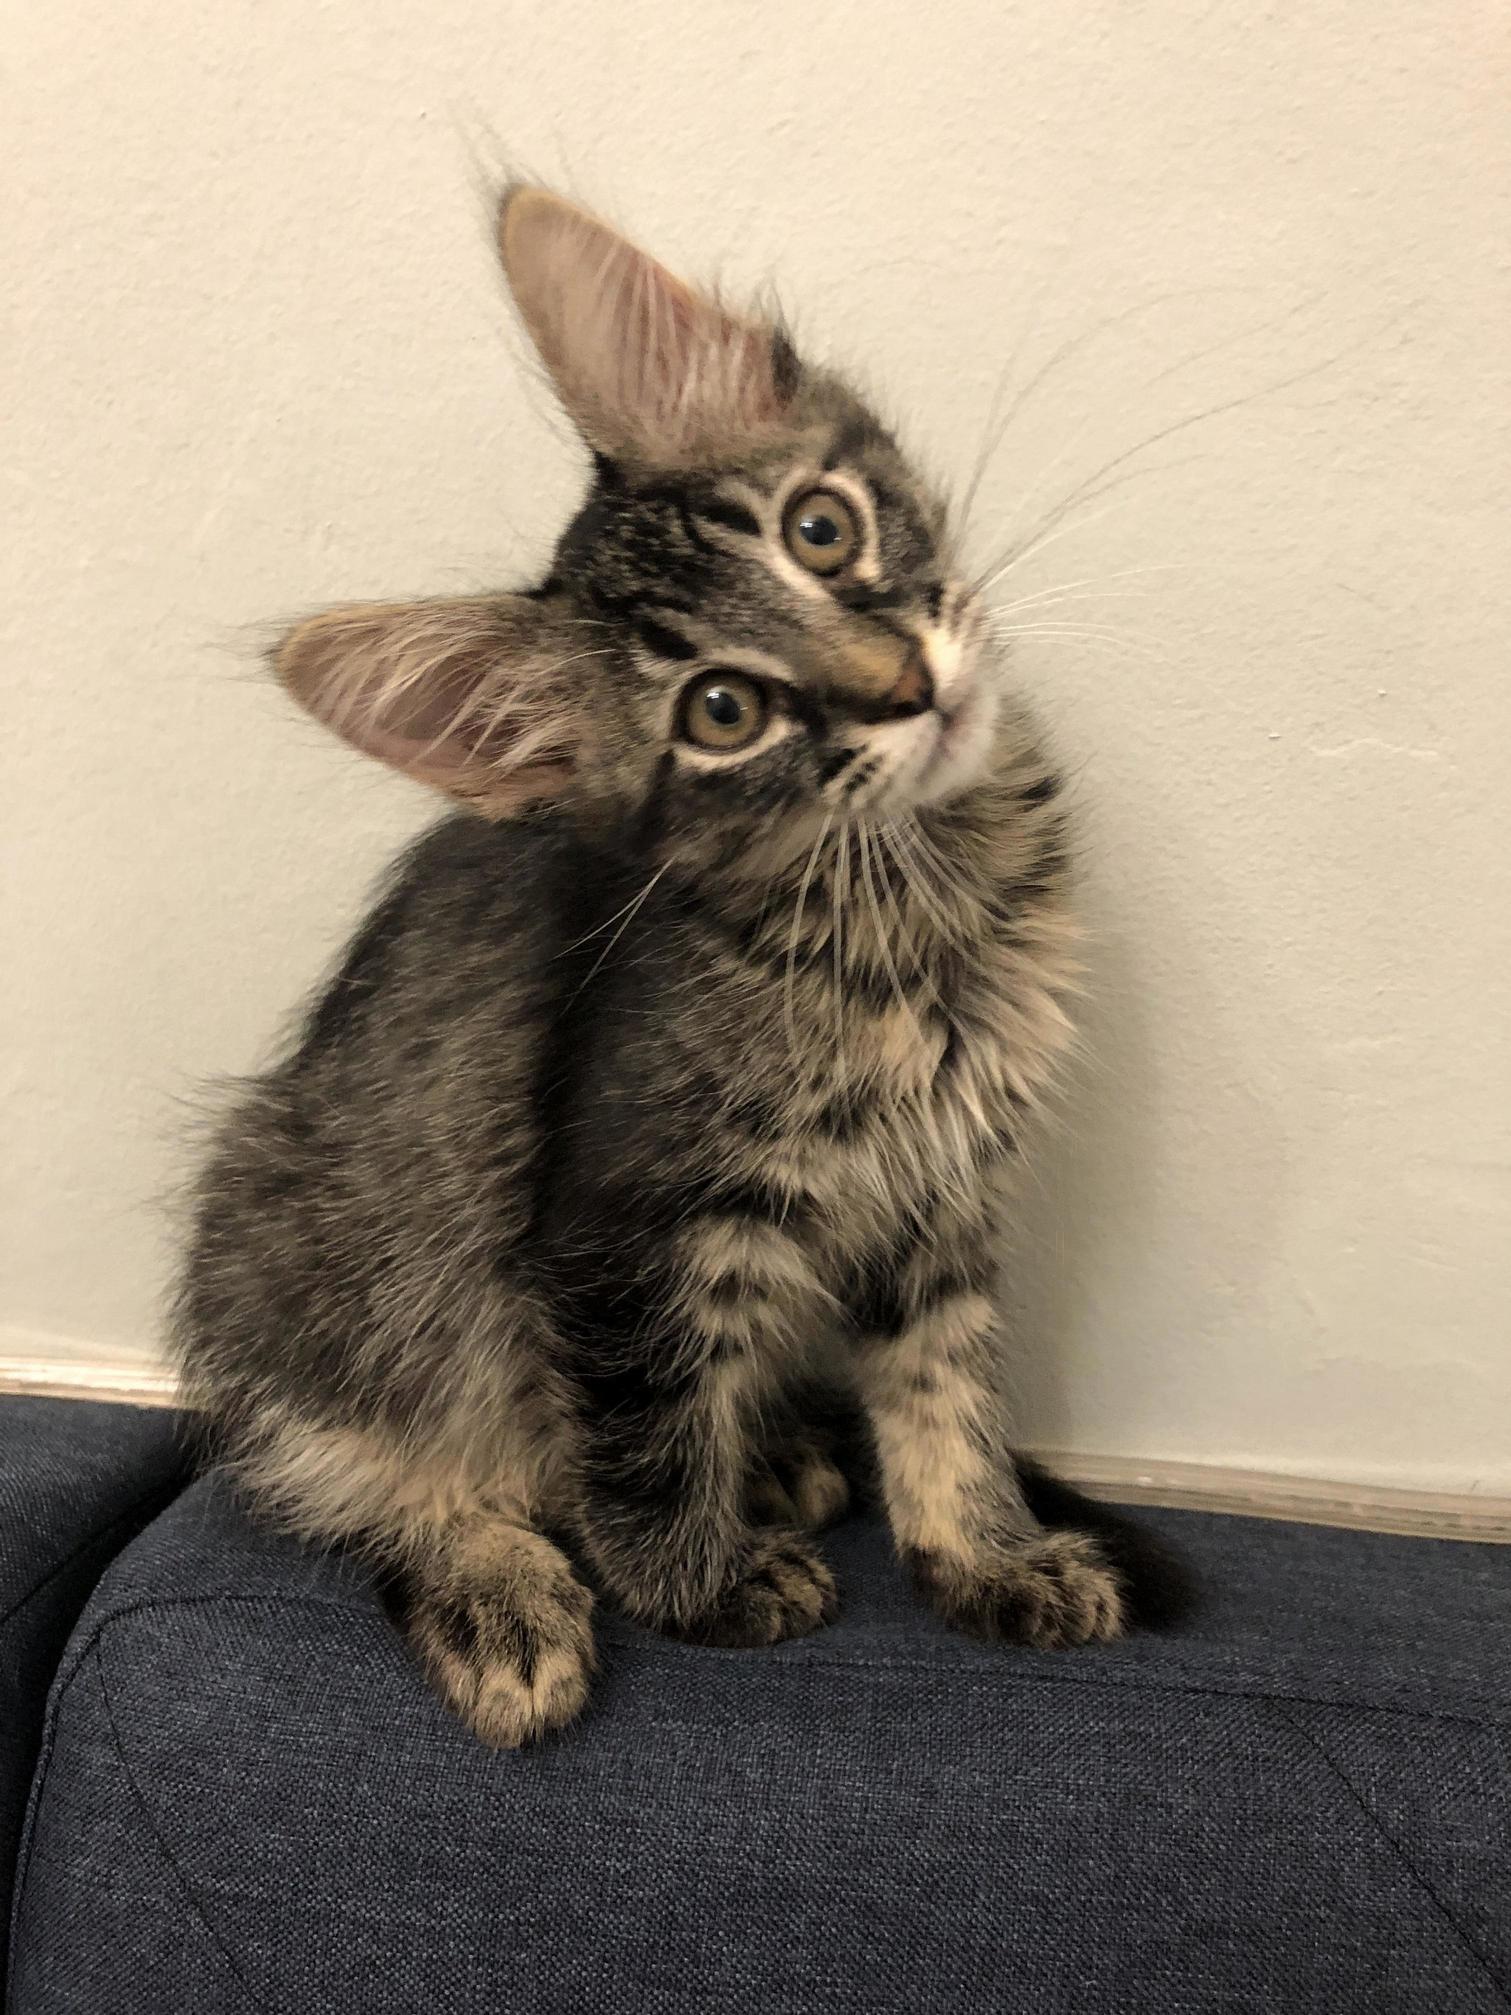 My foster kitten has the most outrageous ears ive ever seen